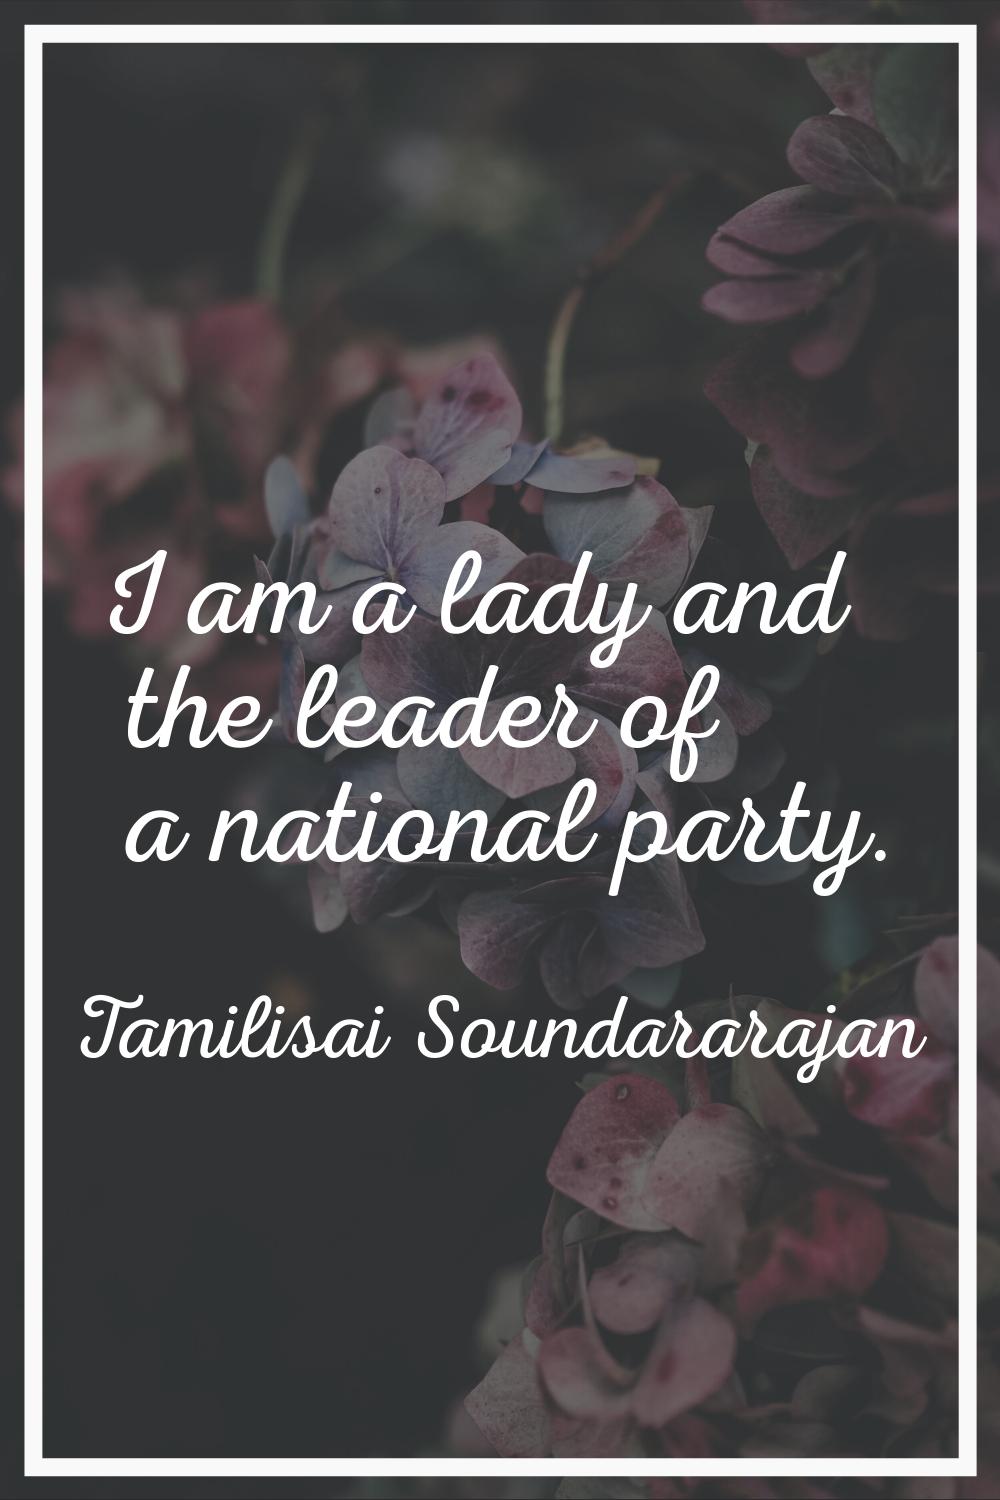 I am a lady and the leader of a national party.